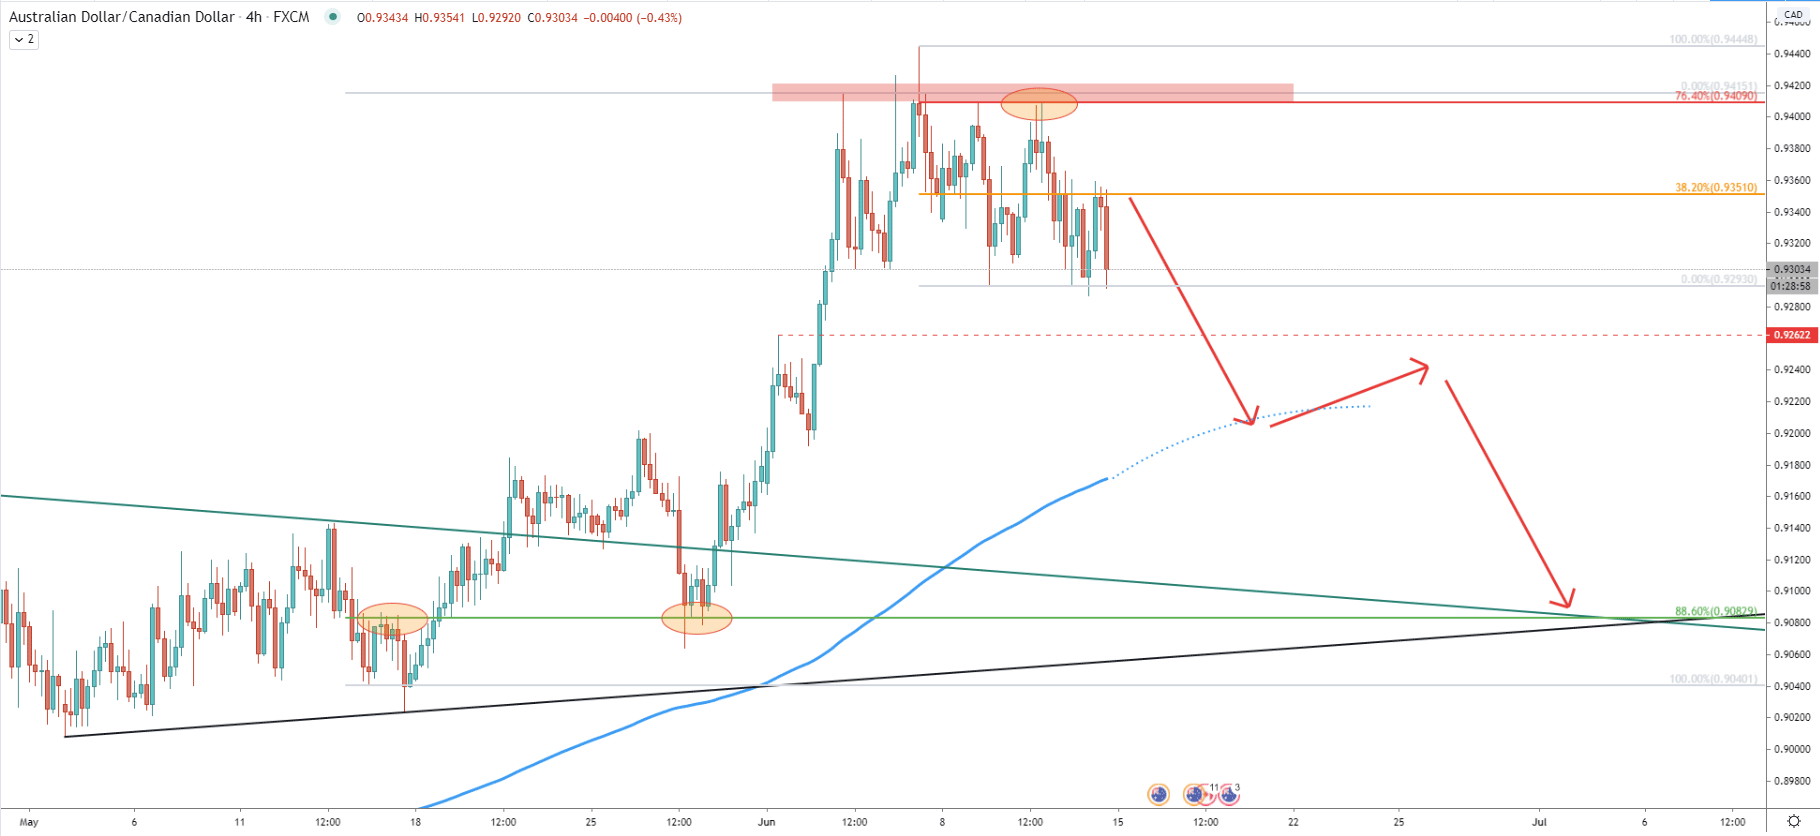 AUD/CAD 4-Hour Technical Analysis 12 June 2020